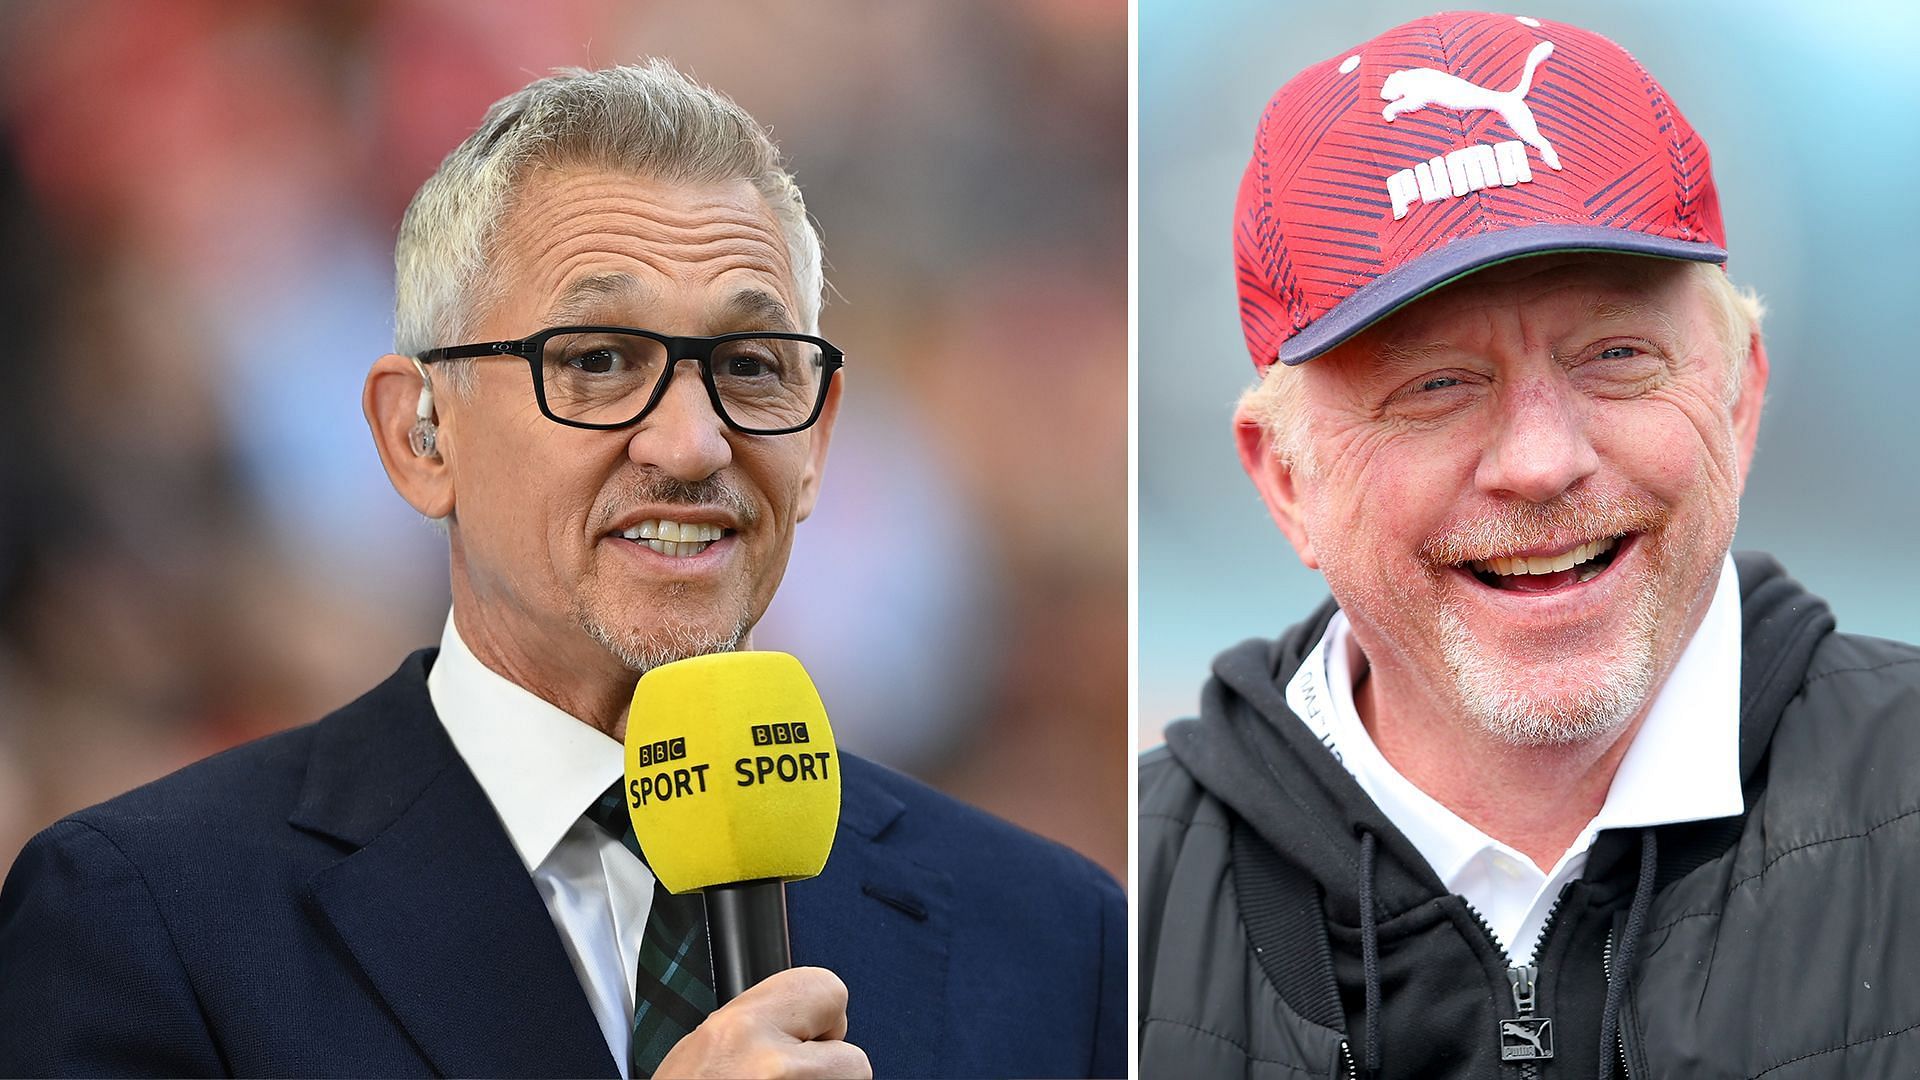 Boris Becker delighted to see Gary Lineker return as BBC host, reacts to veteran presenter's heartfelt statement on controversy